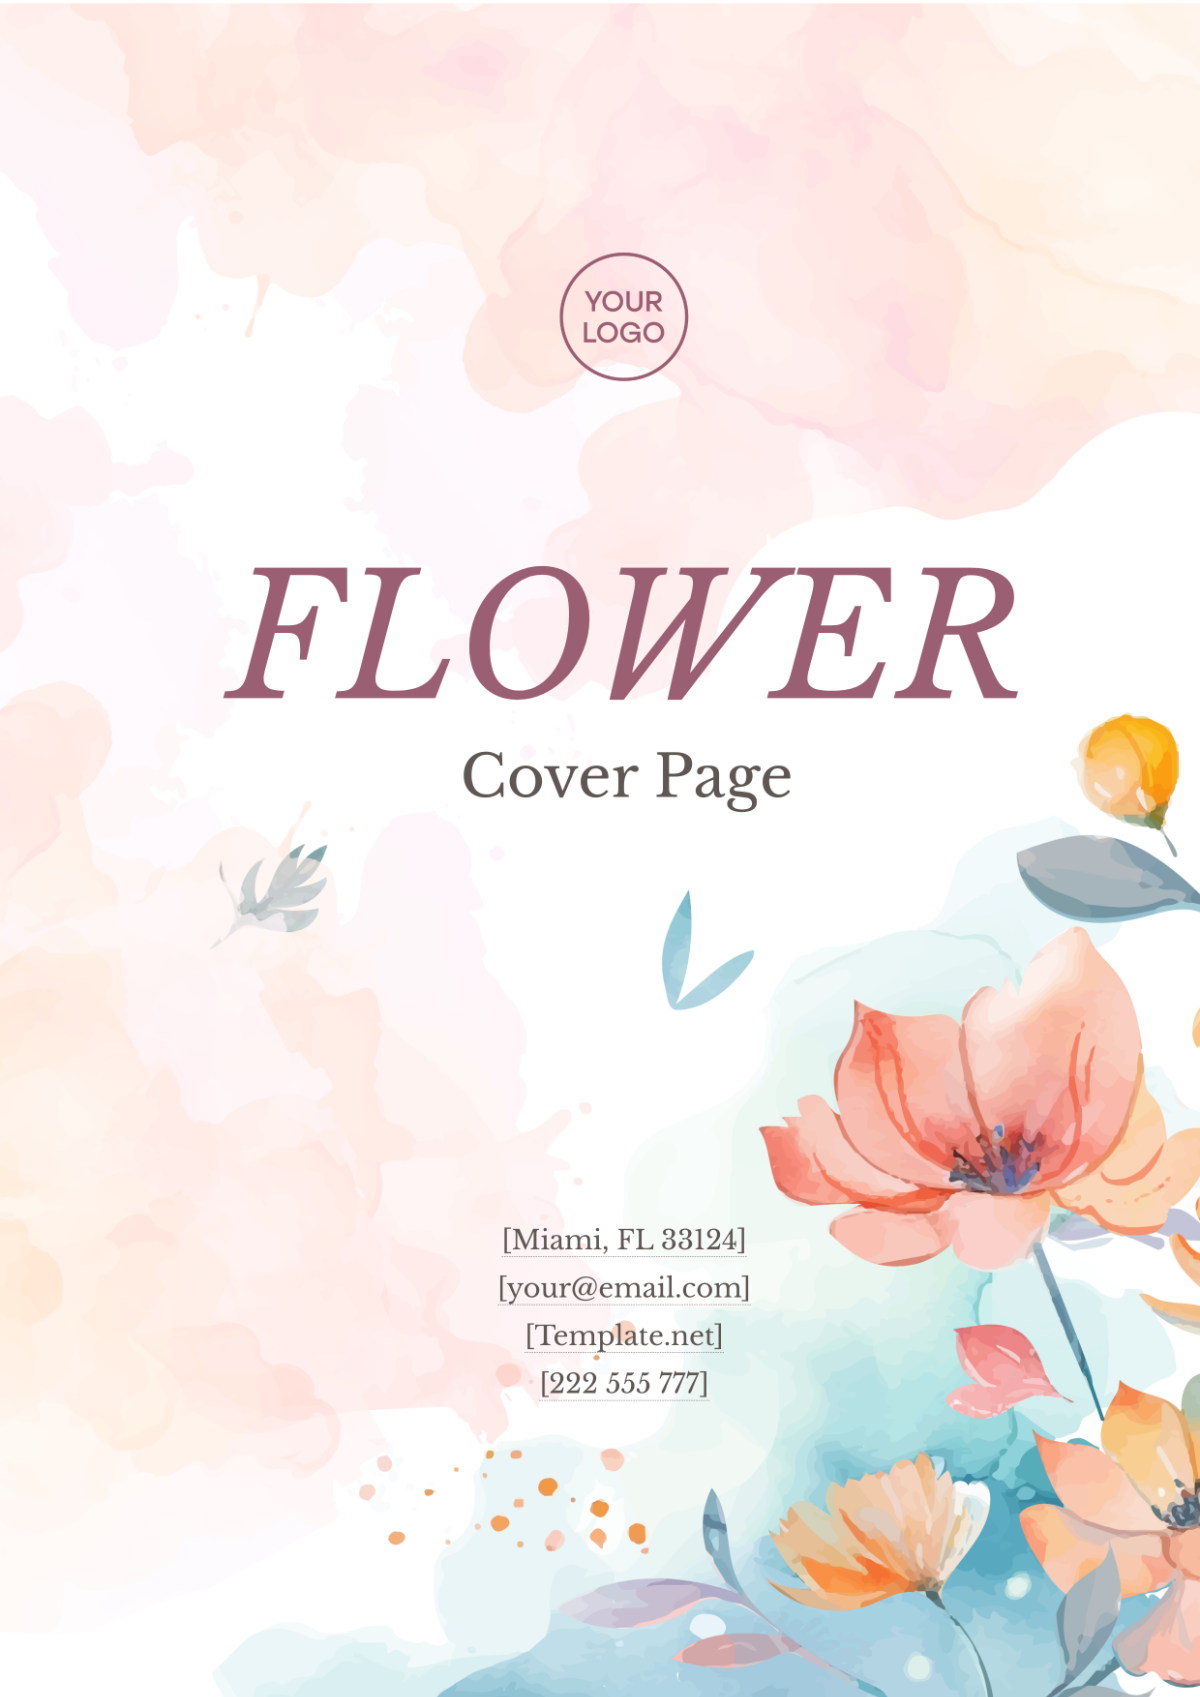 Flower Cover Page Image Template